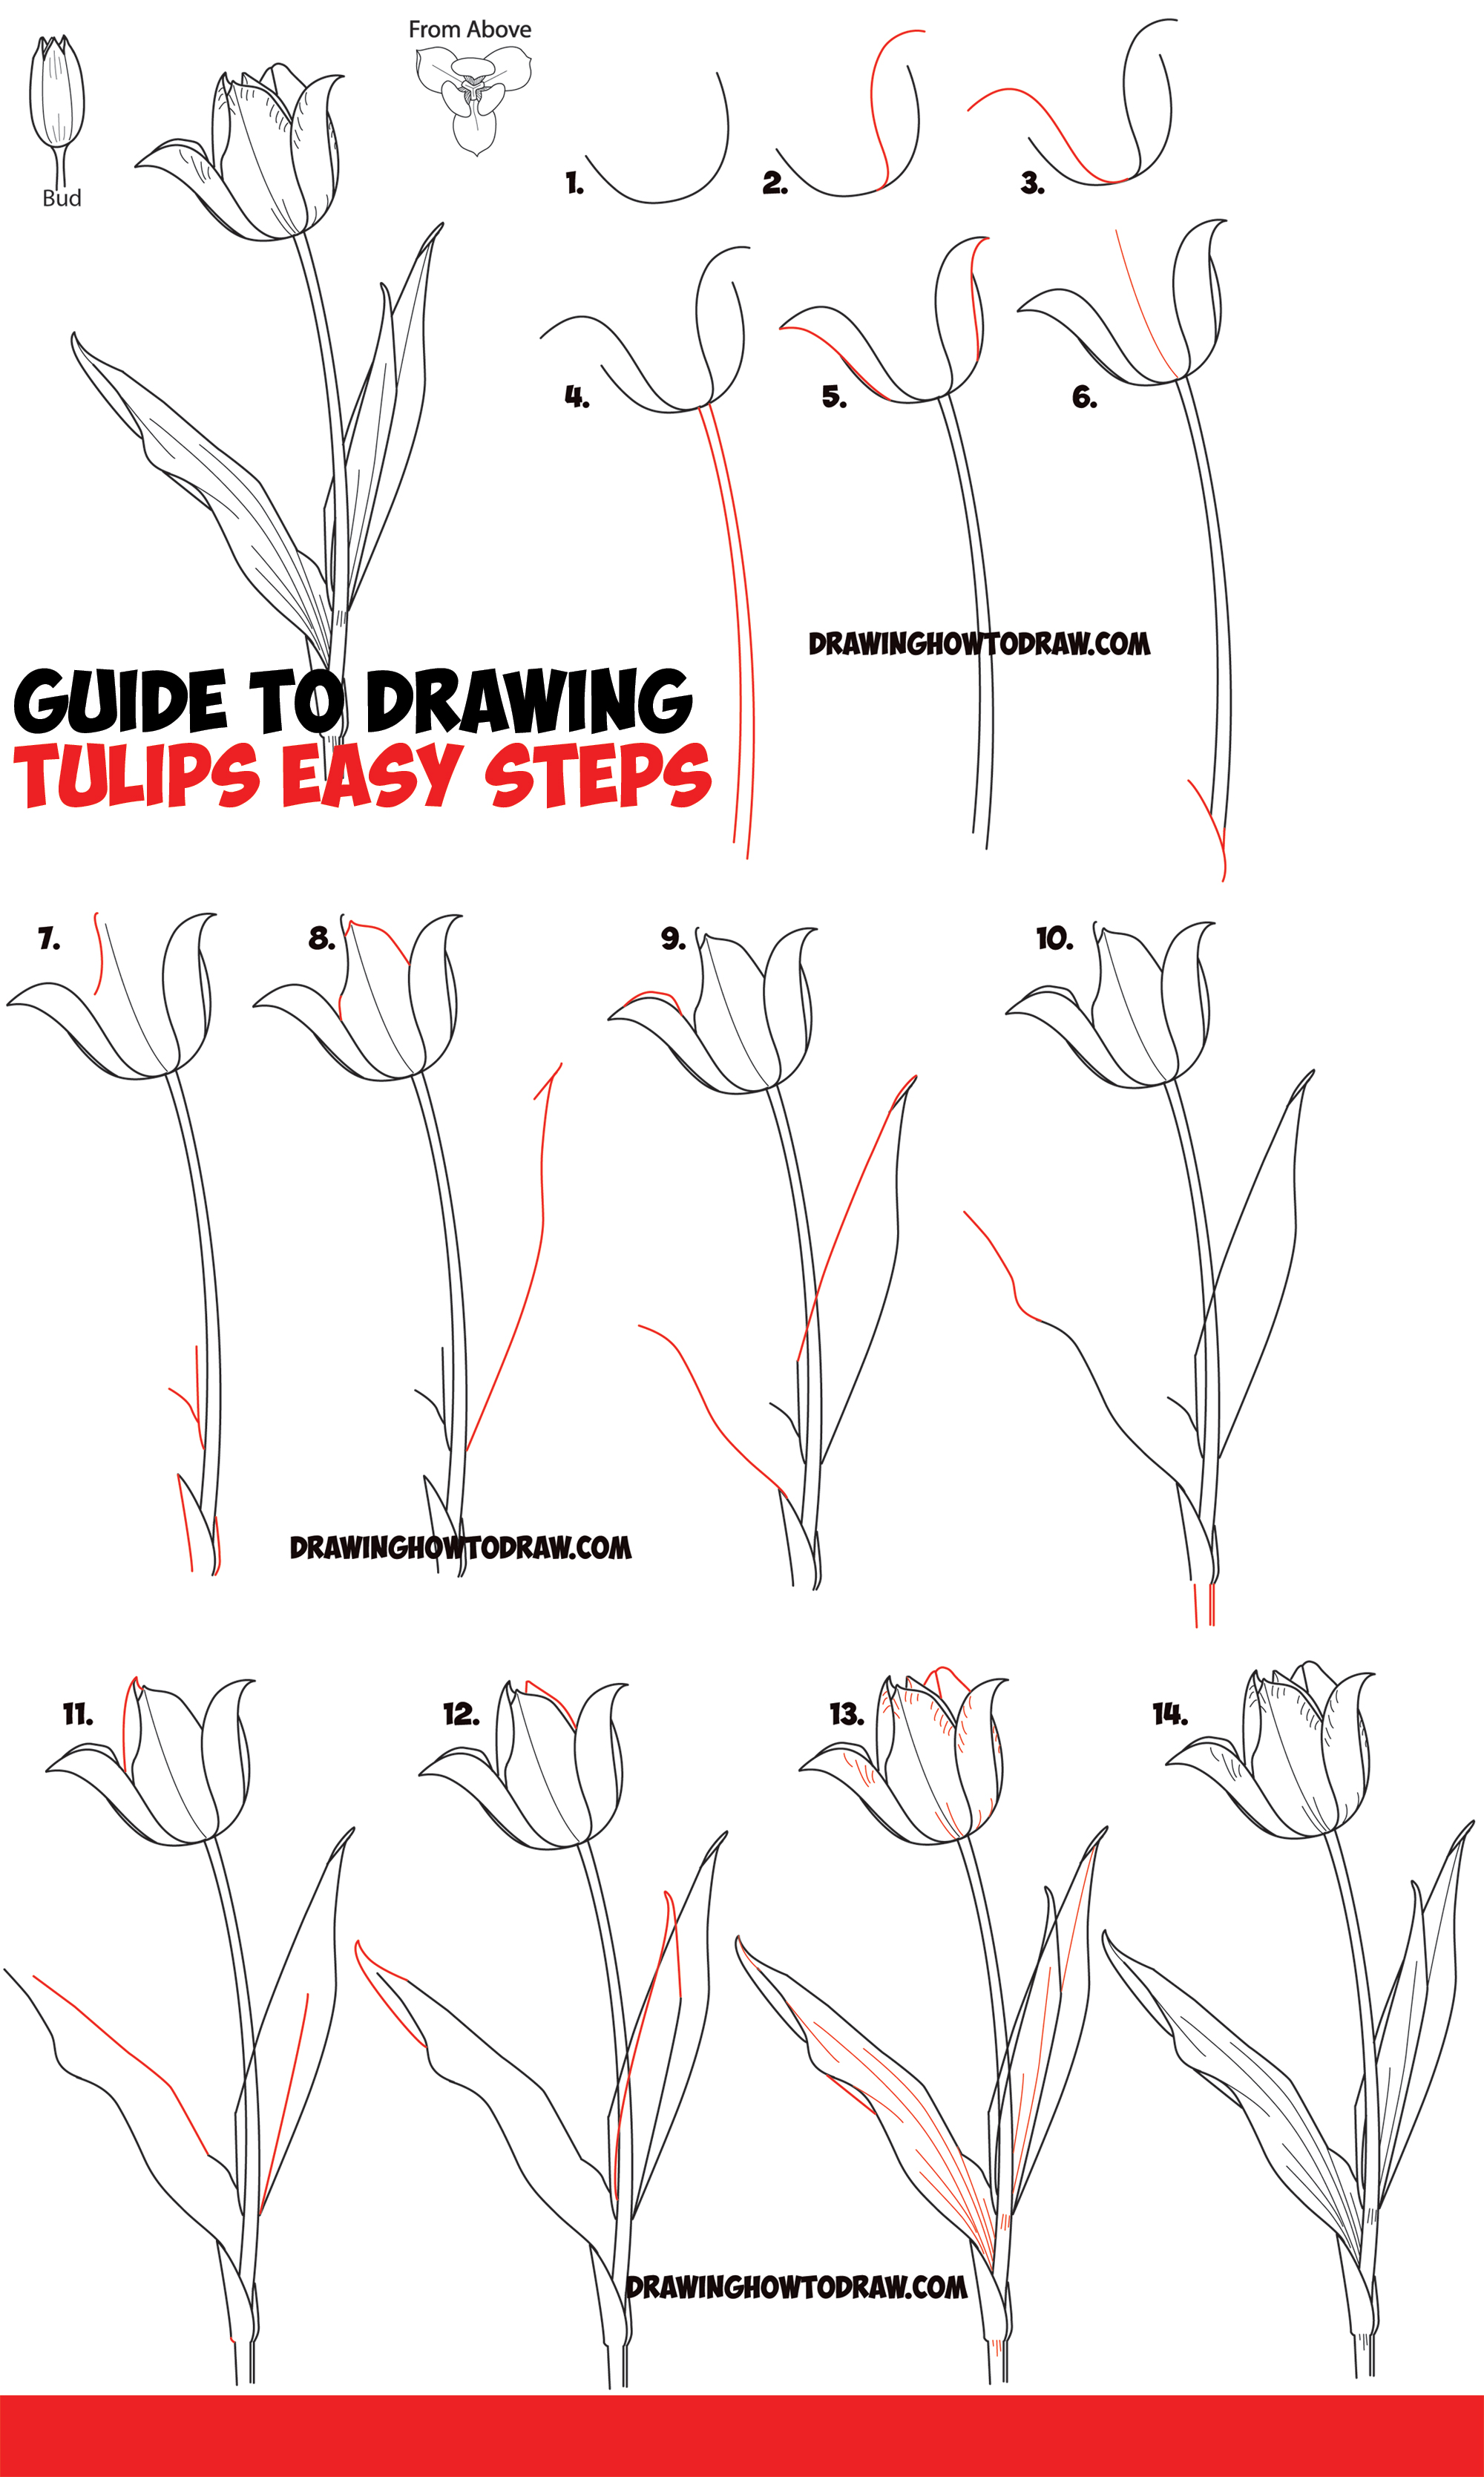 How to Draw Tulips Easy Guide to Drawing Tulips from Side, From Above